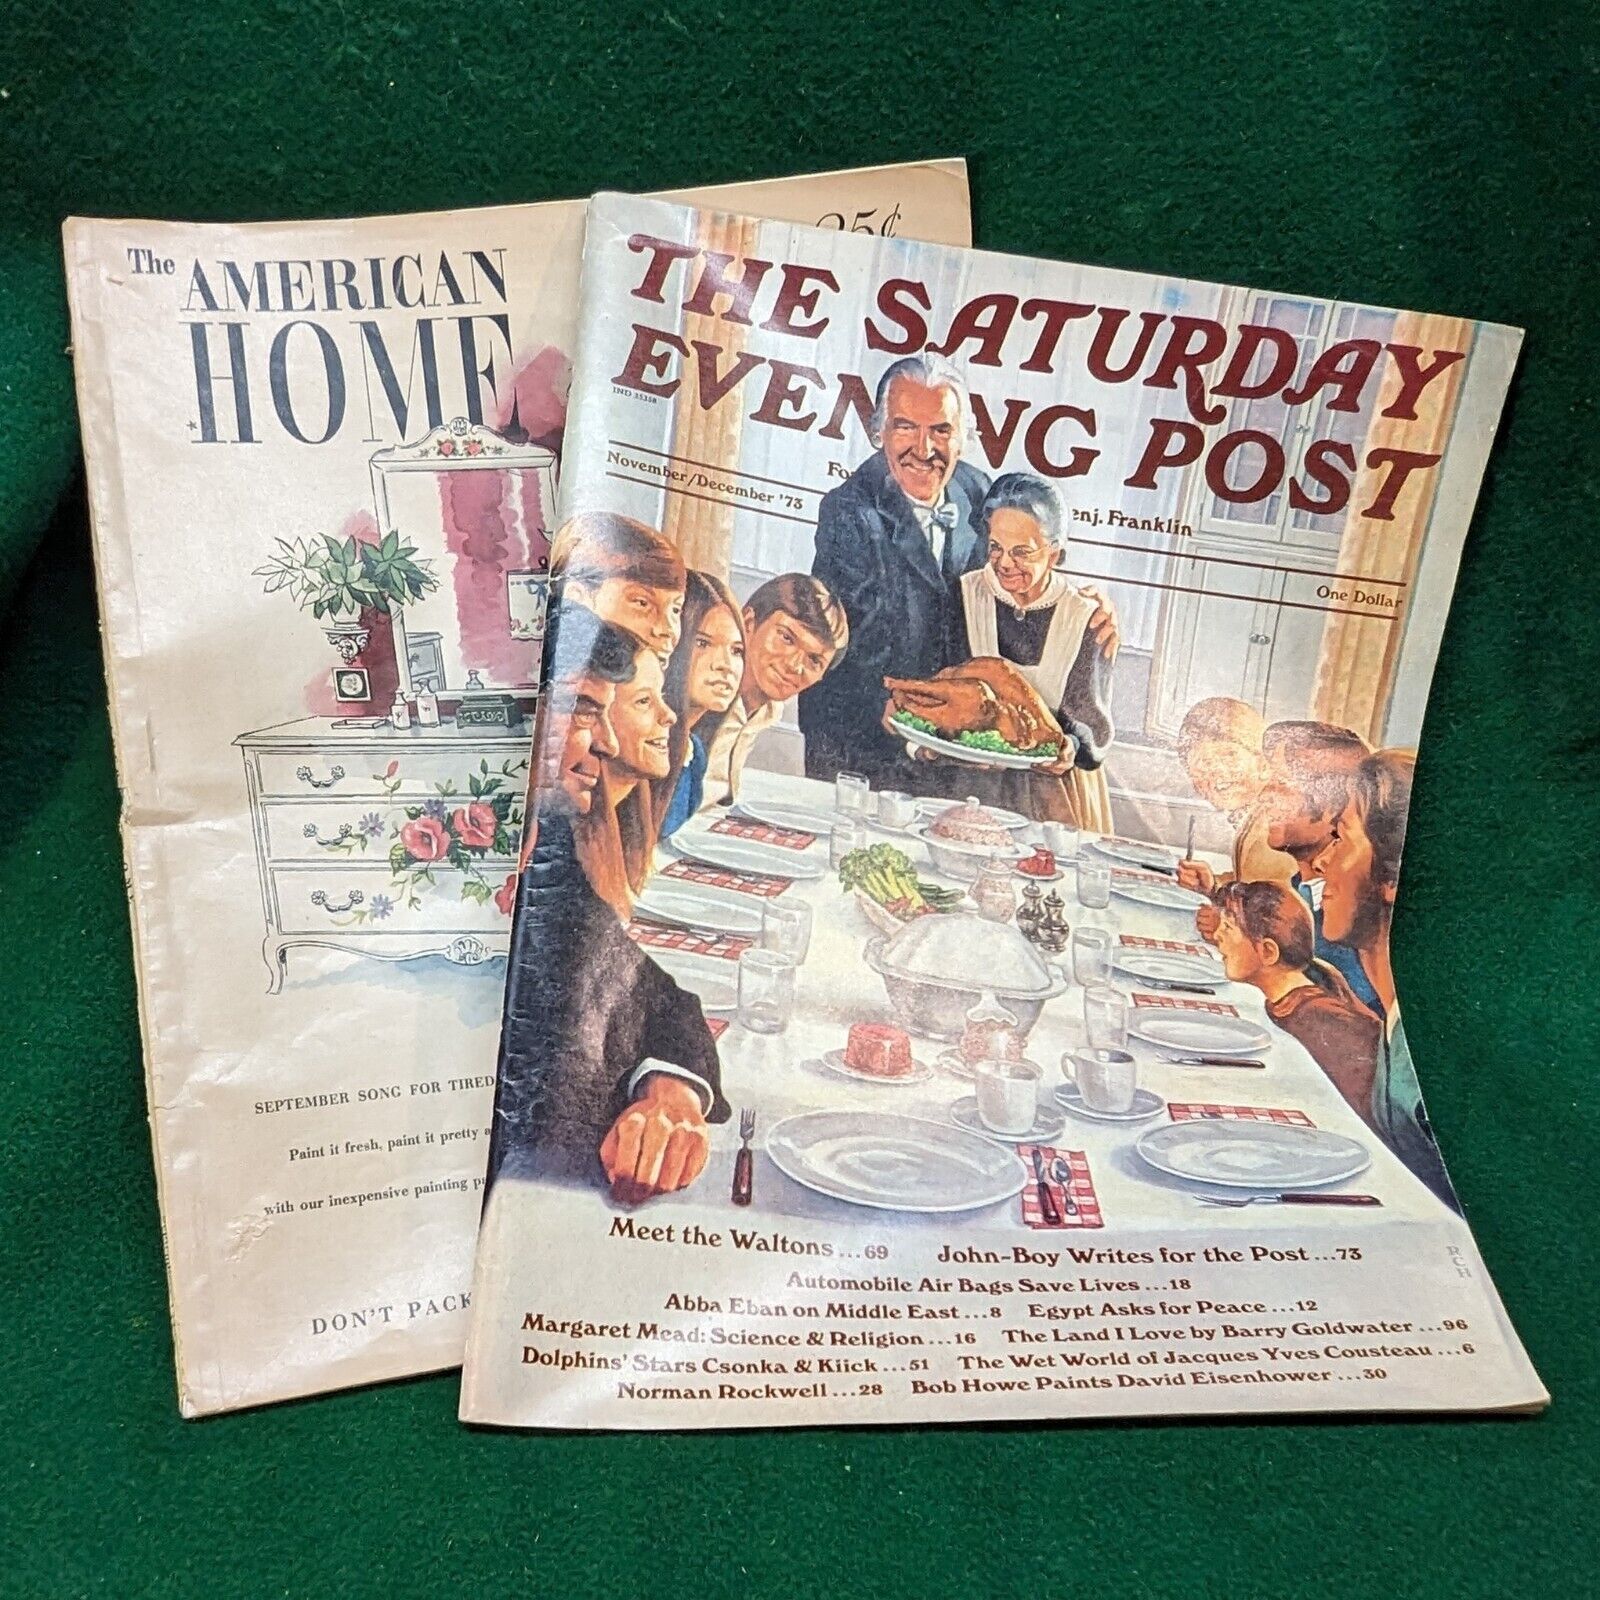 Vintage magazines - 1948 American Home and 1973 Saturday Evening Post (Waltons)